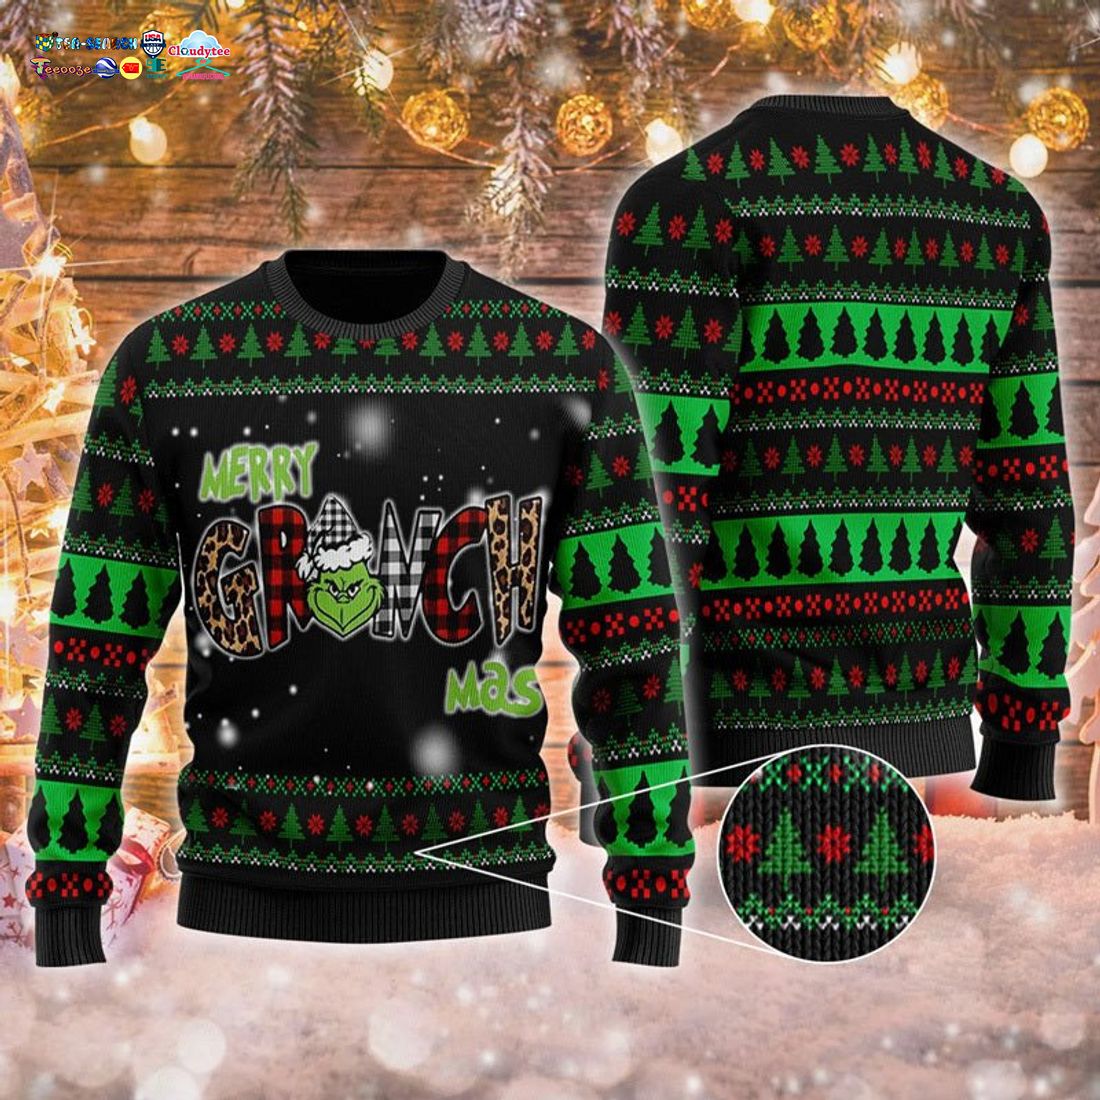 Merry Grinch Mas Ugly Christmas Sweater